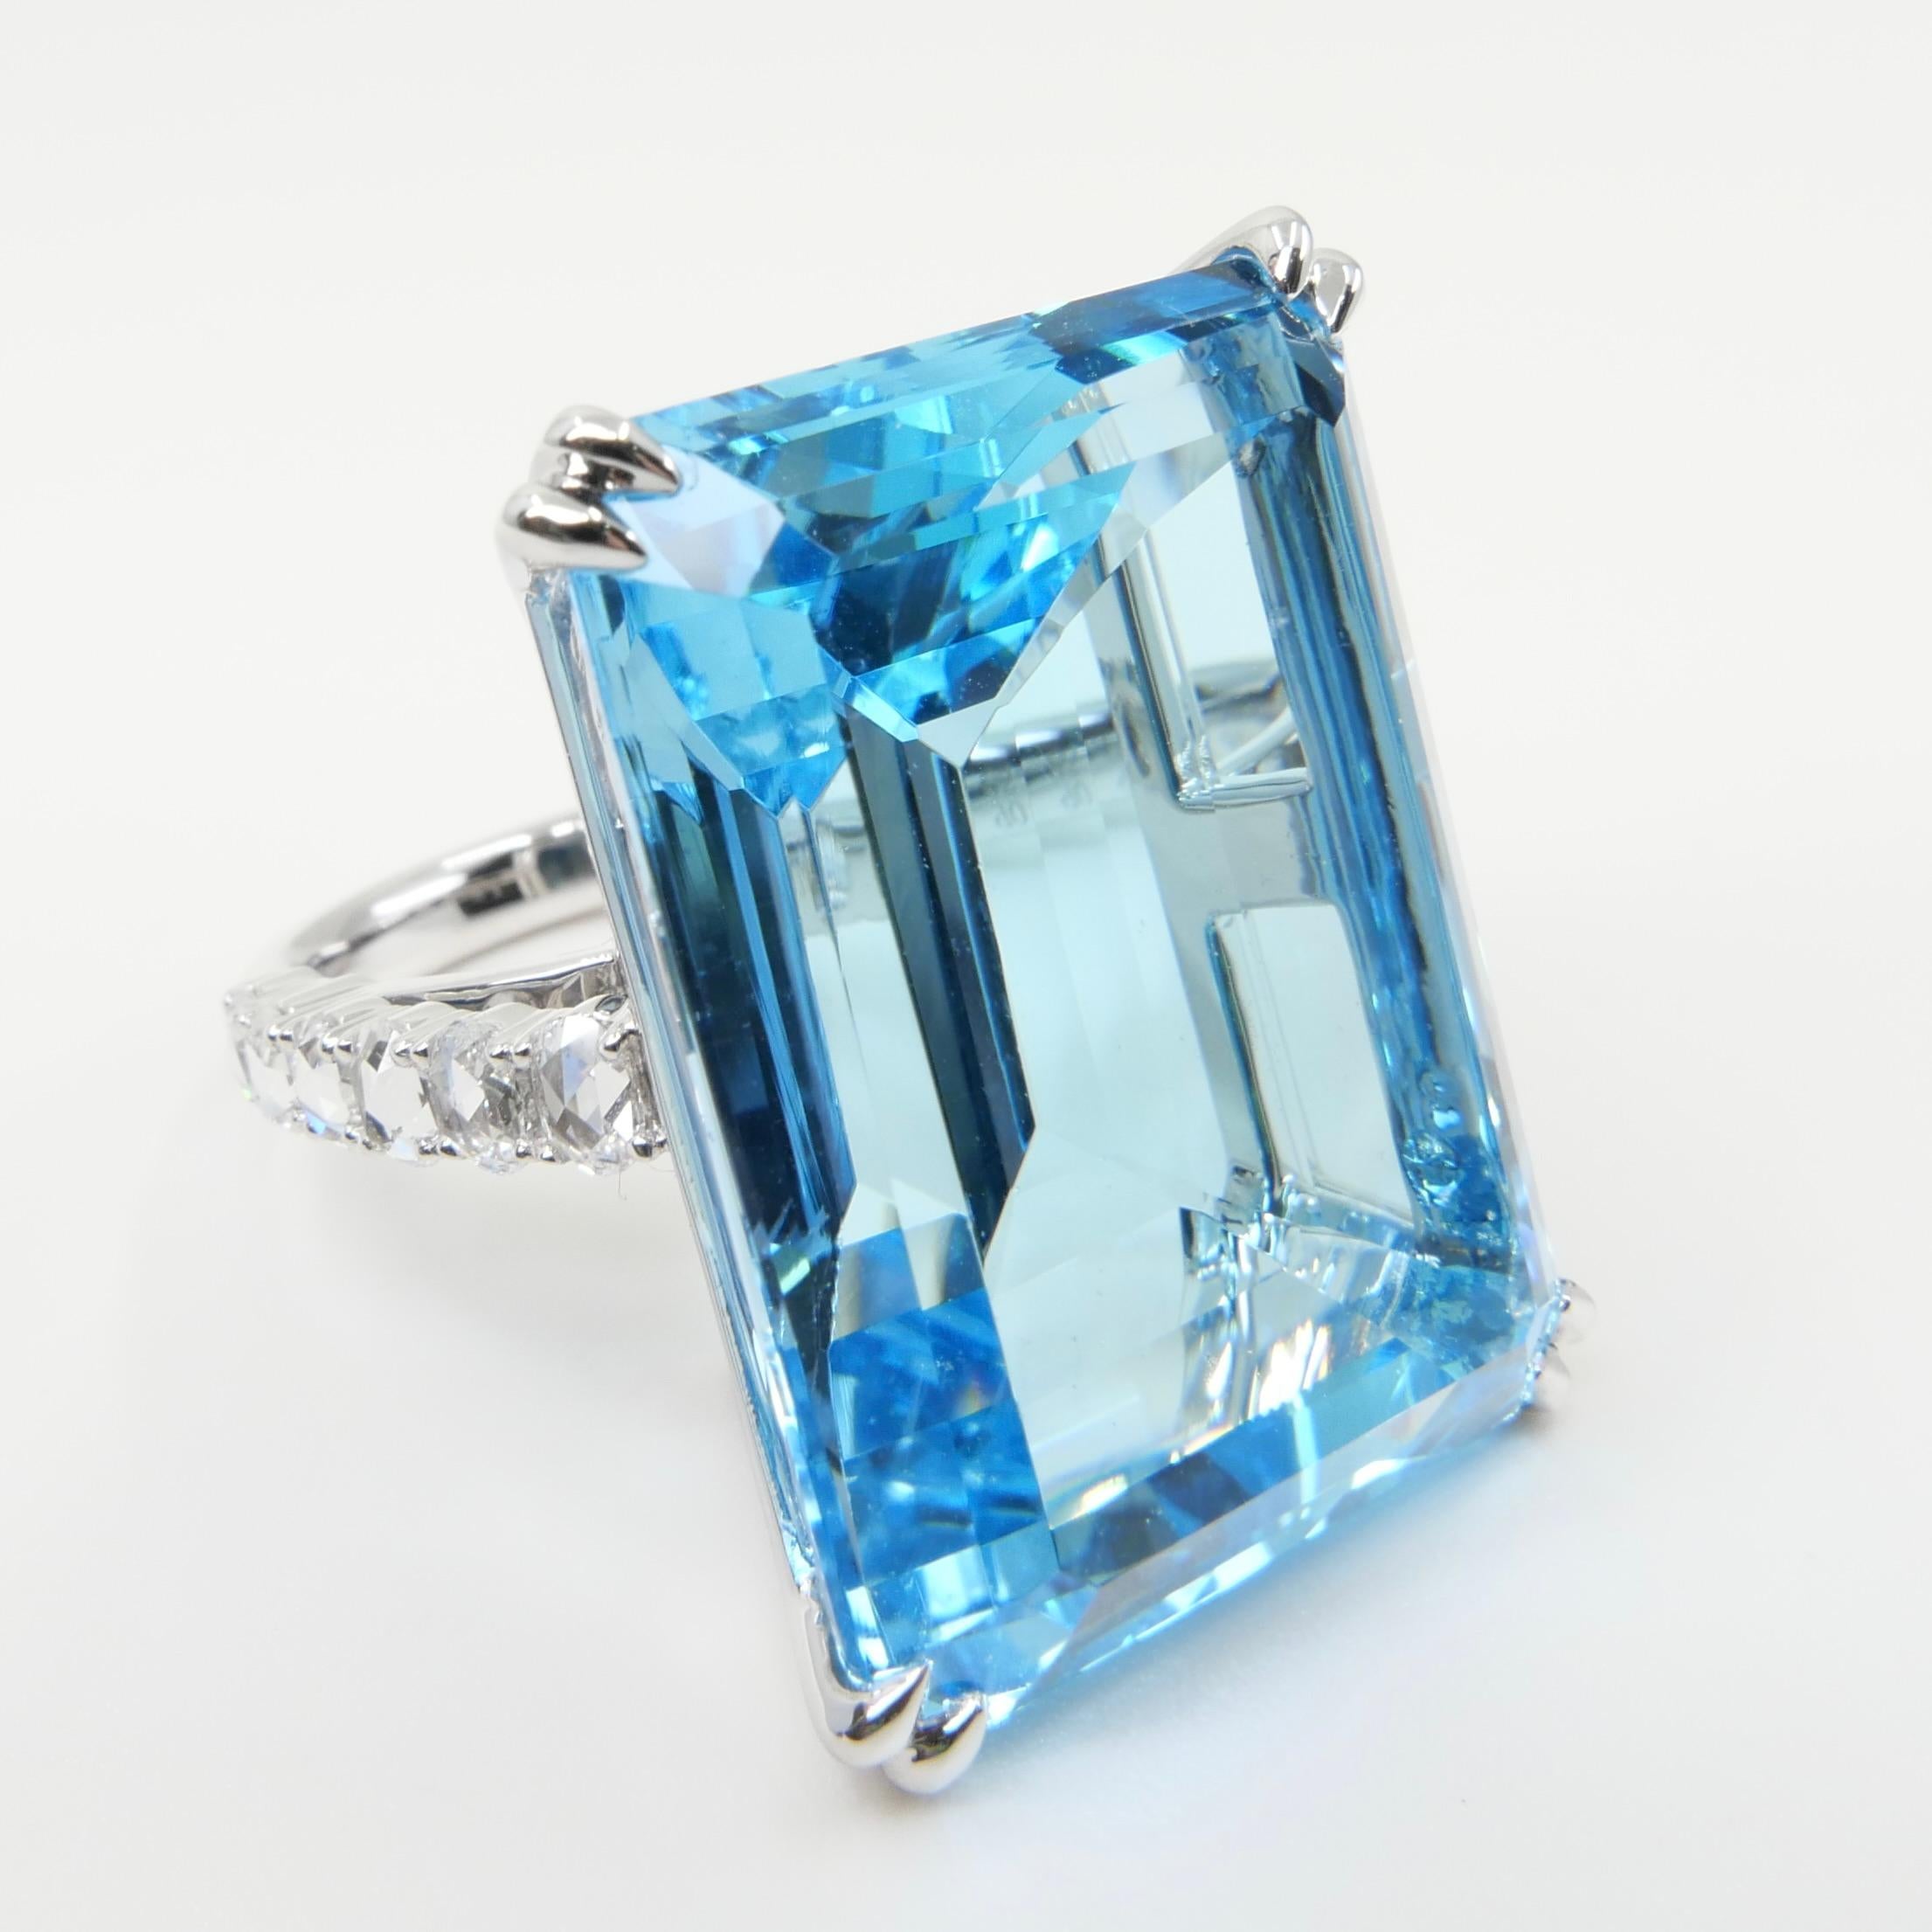 62 Cts Step Cut Blue Topaz & Rose Cut Diamond Cocktail Ring, Substantial For Sale 9